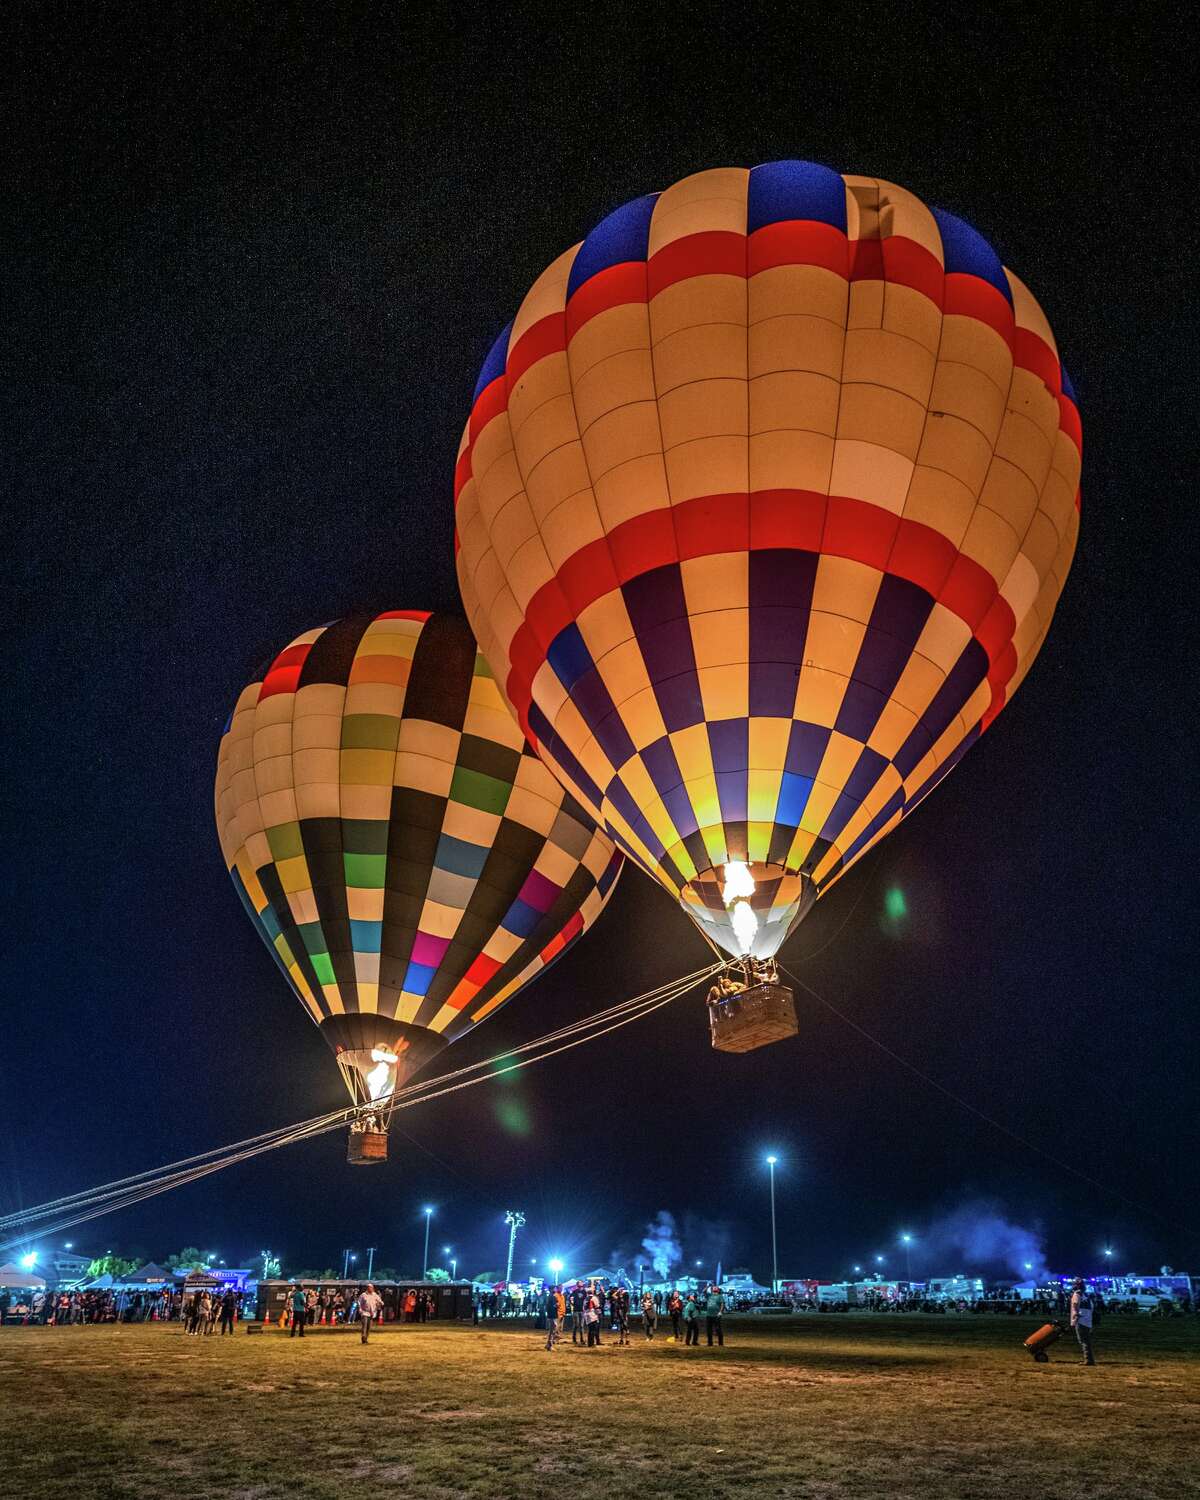 Selma's annual Skylight Balloon Fest is gearing up to dazzle in October just outside San Antonio.  Hot air balloon rides, live music, acrobatic shows, food trucks and much more are part of the events program. 